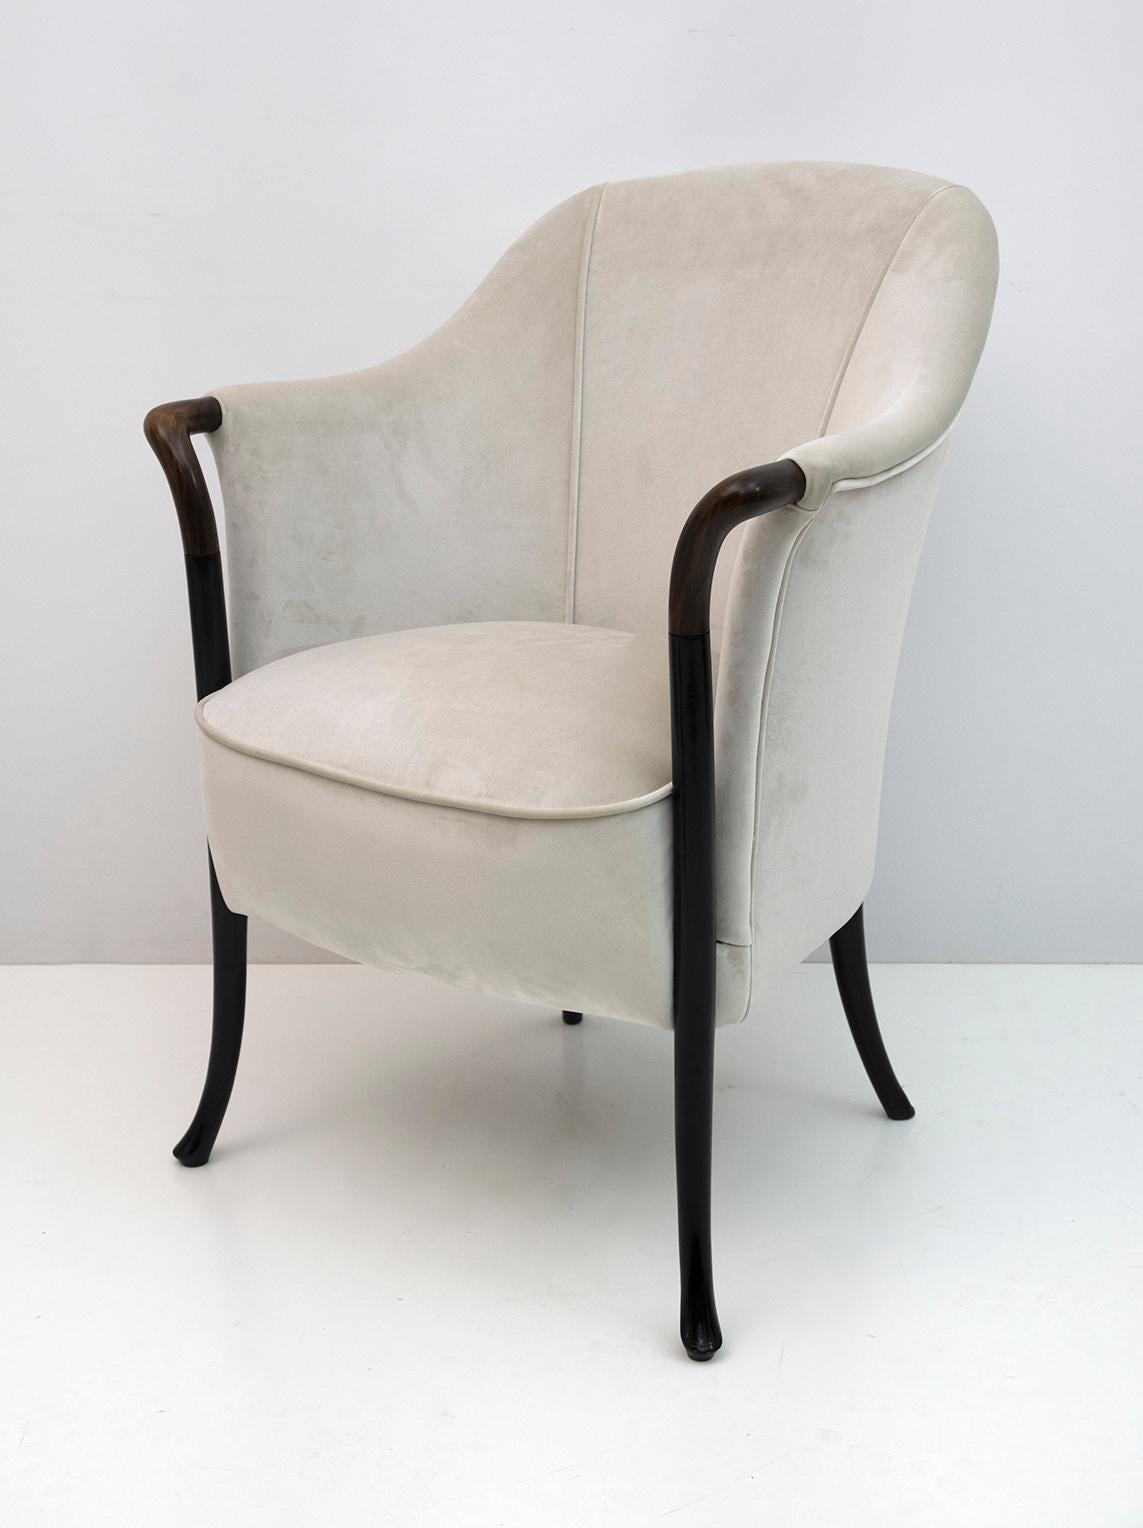 Armchair in solid ebonized beech and armrests in glossy Pau Ferro, the padding of the seat and back is in polyurethane foam.
It has been completely restored and upholstered in ivory velvet.

Founded by Luigi Giorgetti in Brianza in 1898, the